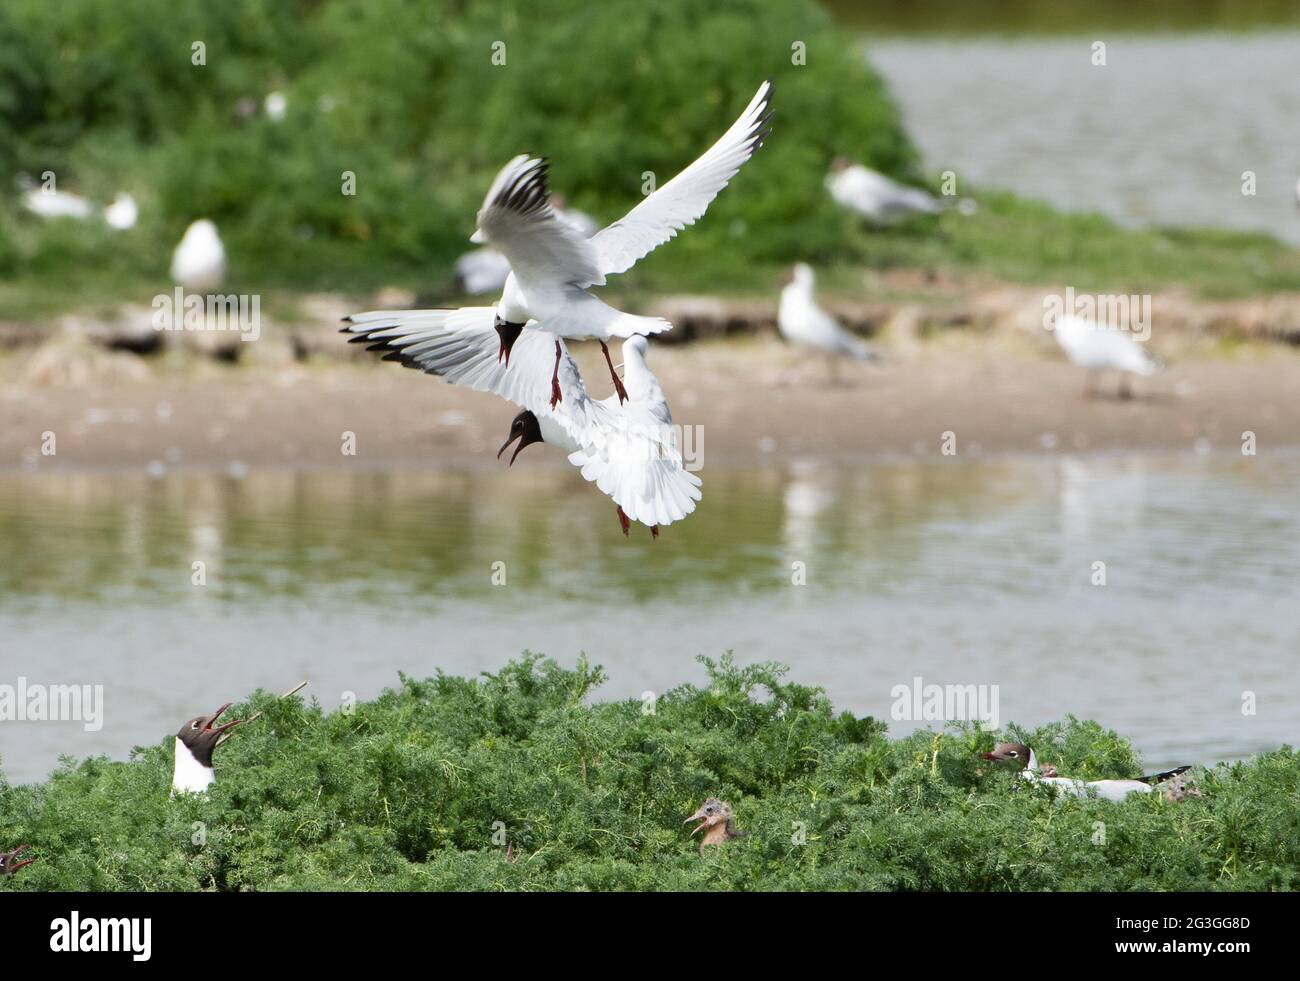 Black-headed gulls fight to protect their nests from the other gulls in a nesting colony at RSPB's Leighton Moss Nature Reserve, Silverdale, Lancashir Stock Photo